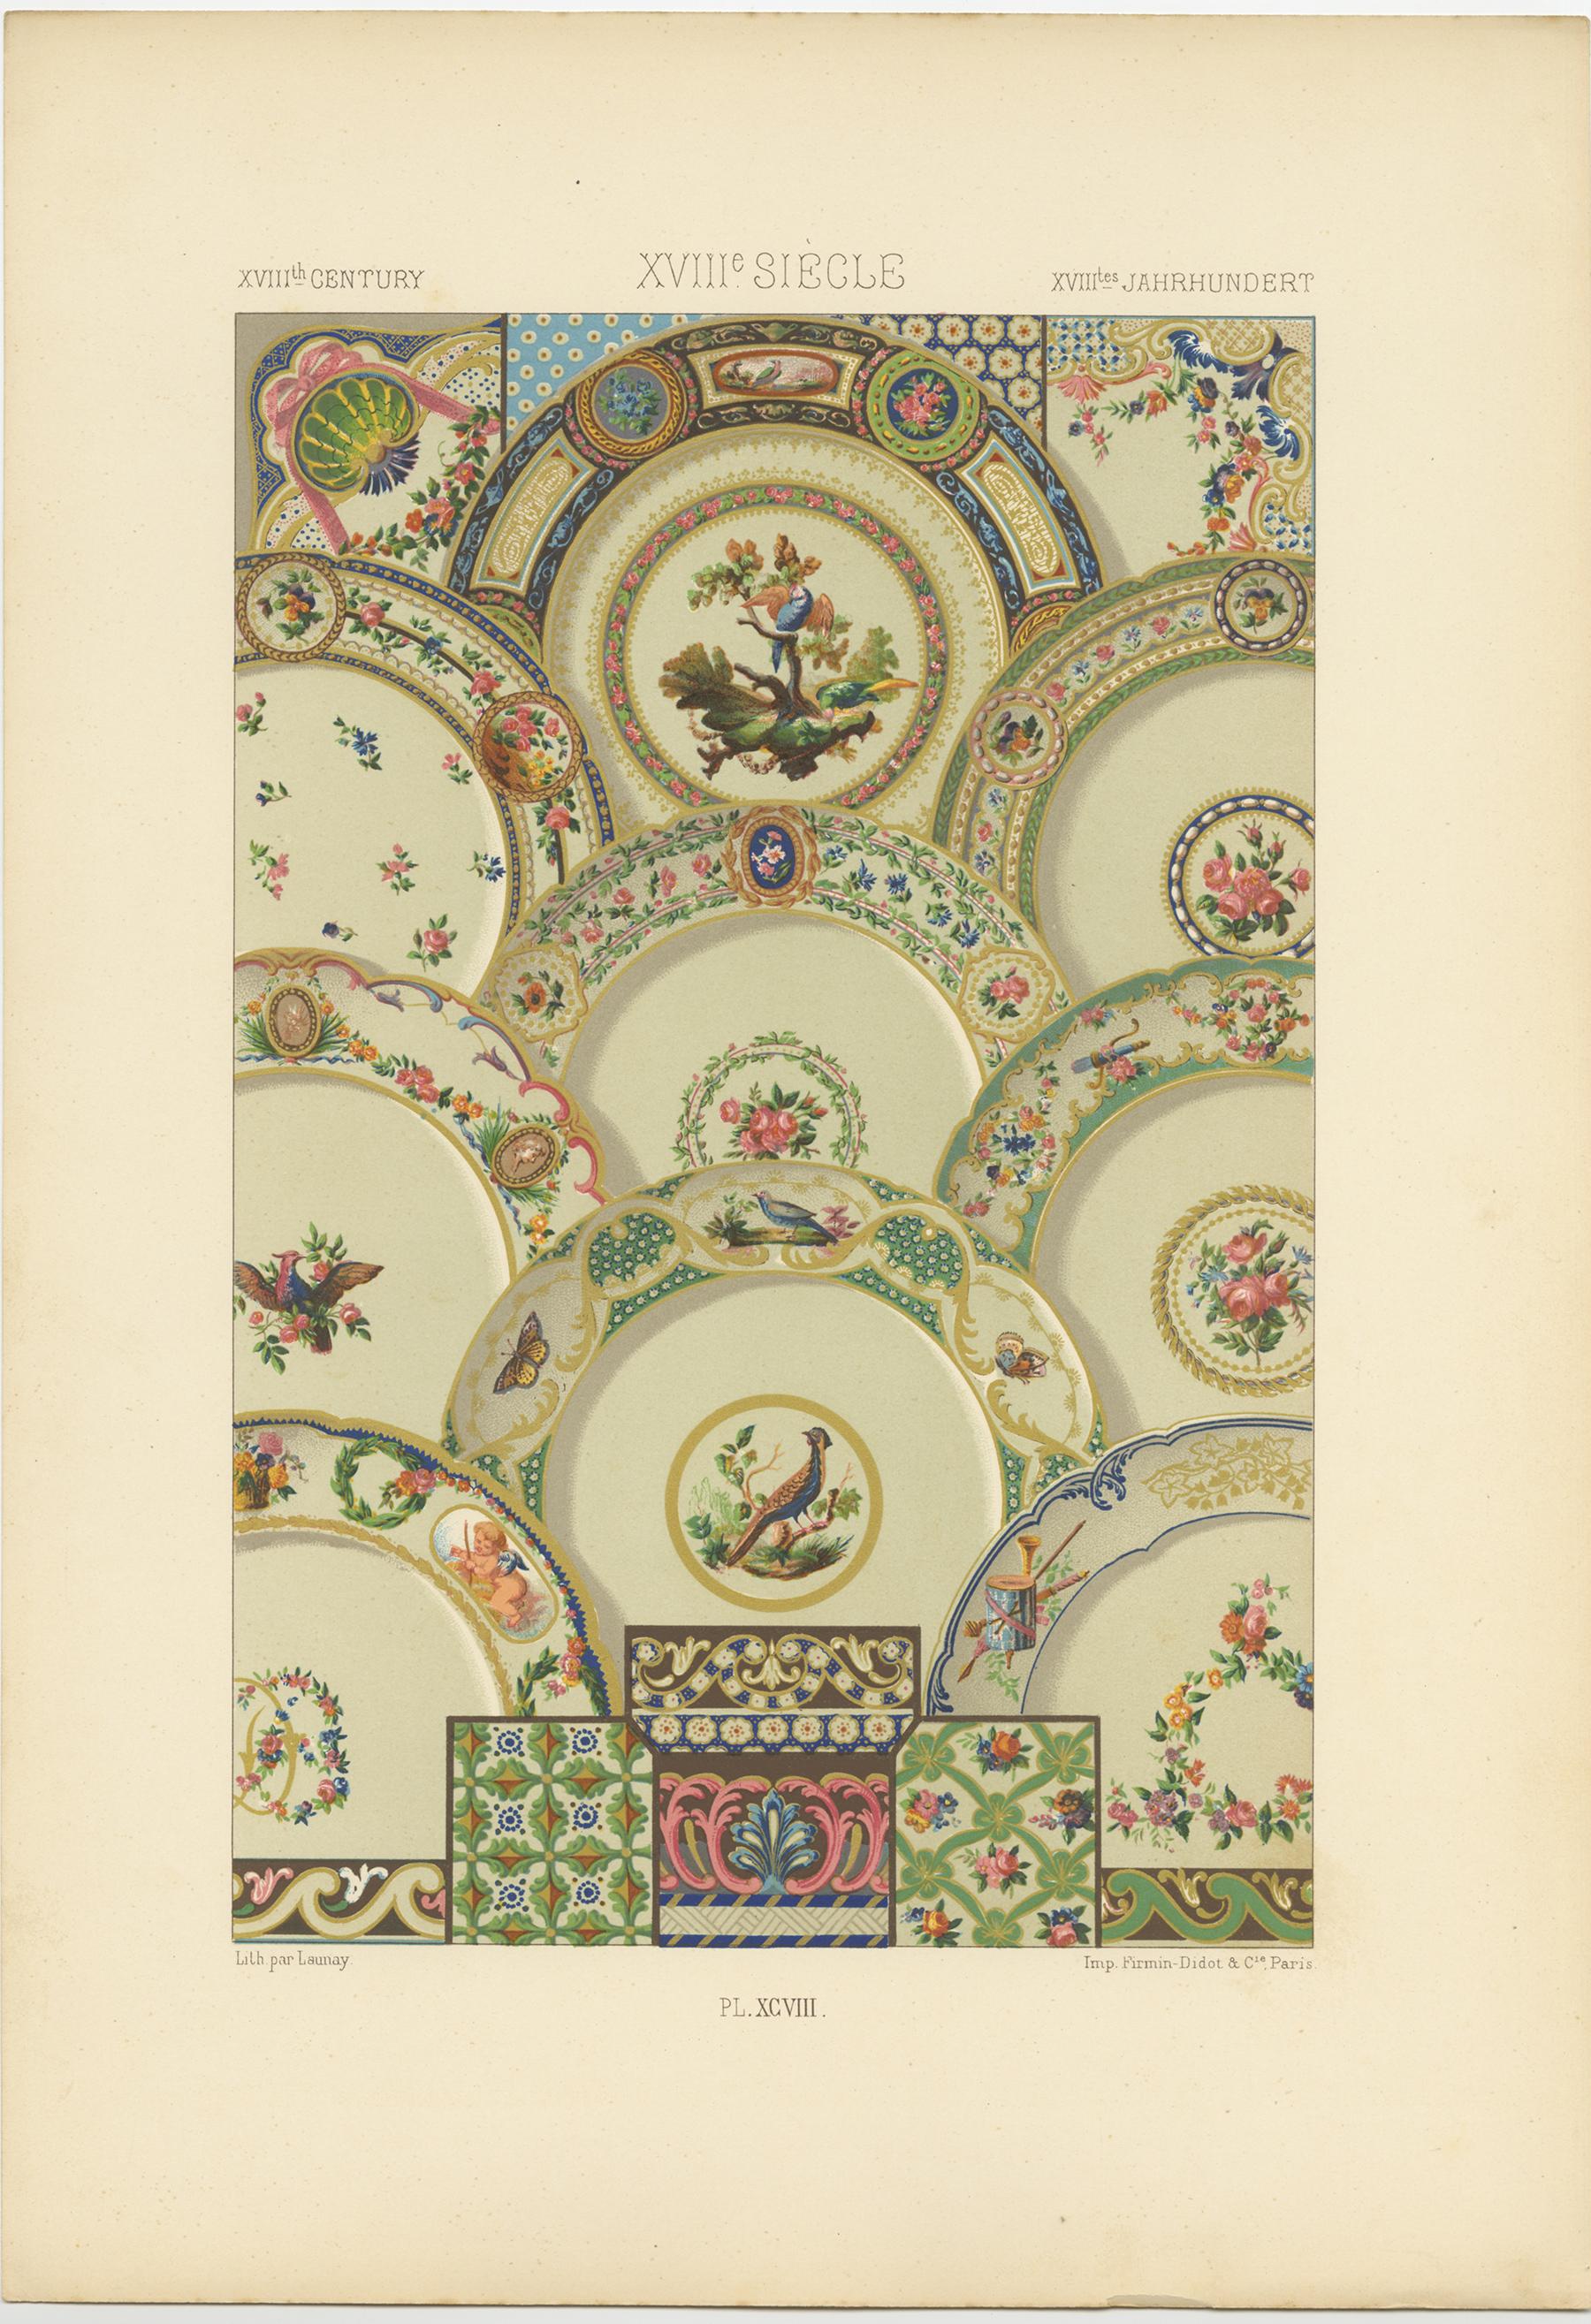 Antique print titled 'XVIIIth Century - XVIIIe Siecle - XVIIItes Jahrhundert'. Chromolithograph of XVIIIth Century ornaments and decorative arts. This print originates from 'l'Ornement Polychrome' by Auguste Racinet. Published circa 1890.